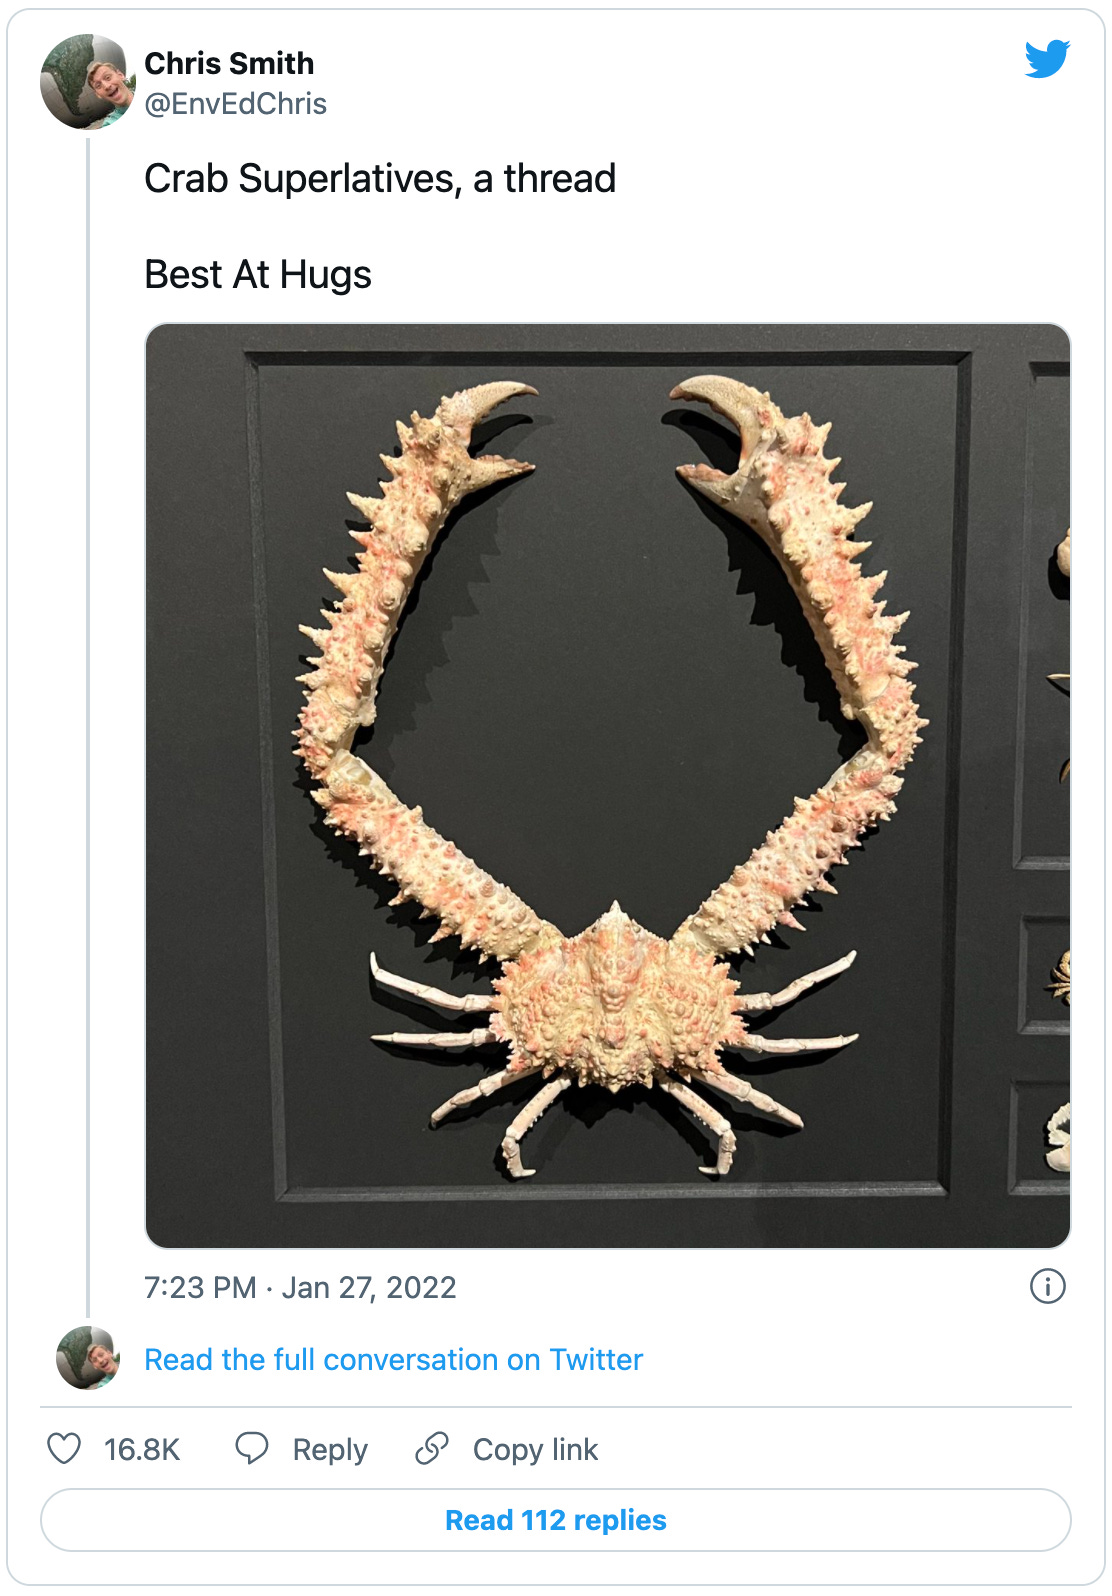 @EnvEdChris tweets: “Crab Superlatives, a thread. Best At Hugs:” with a picture of a spiky white crab with incredibly long front claws. The rest of the thread has many more excellent crabs.